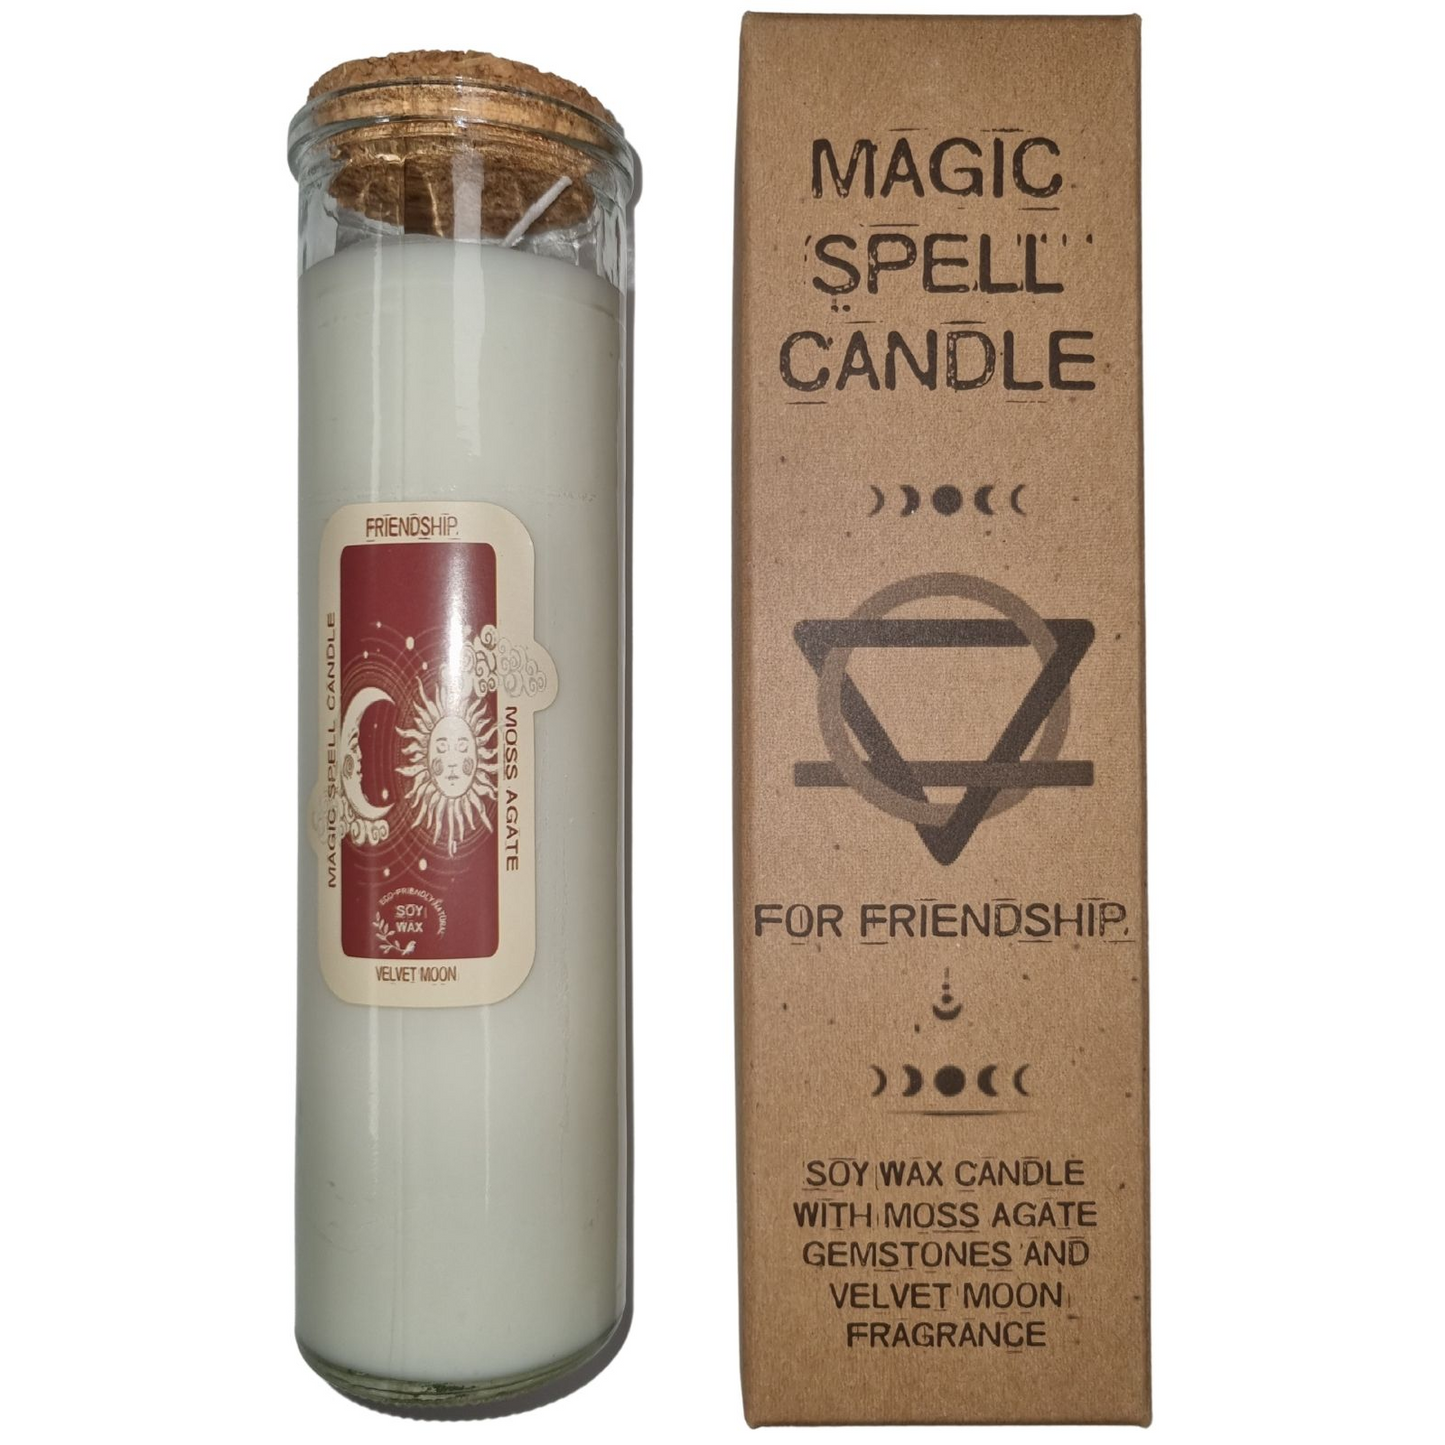 Magic Spell Candle - Friendship